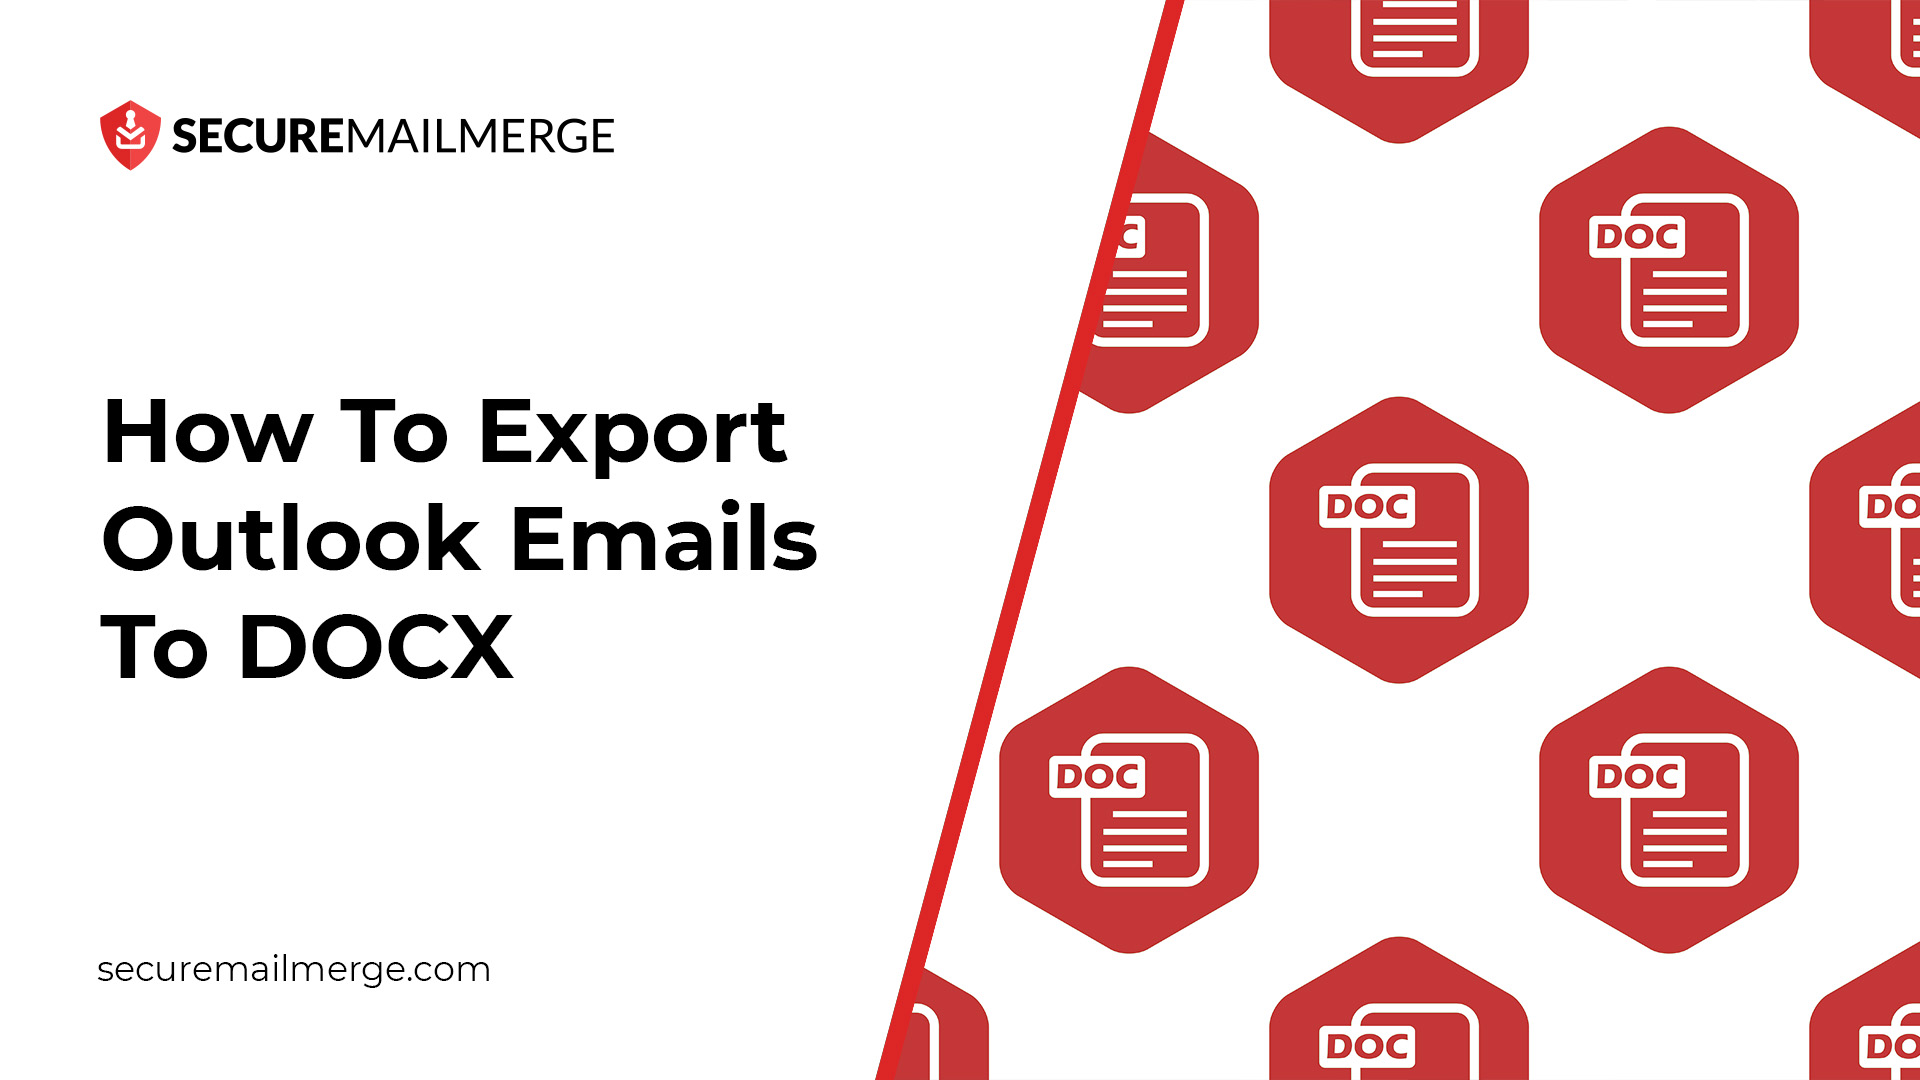 Wie exportiere ich Outlook-E-Mails in DOCX